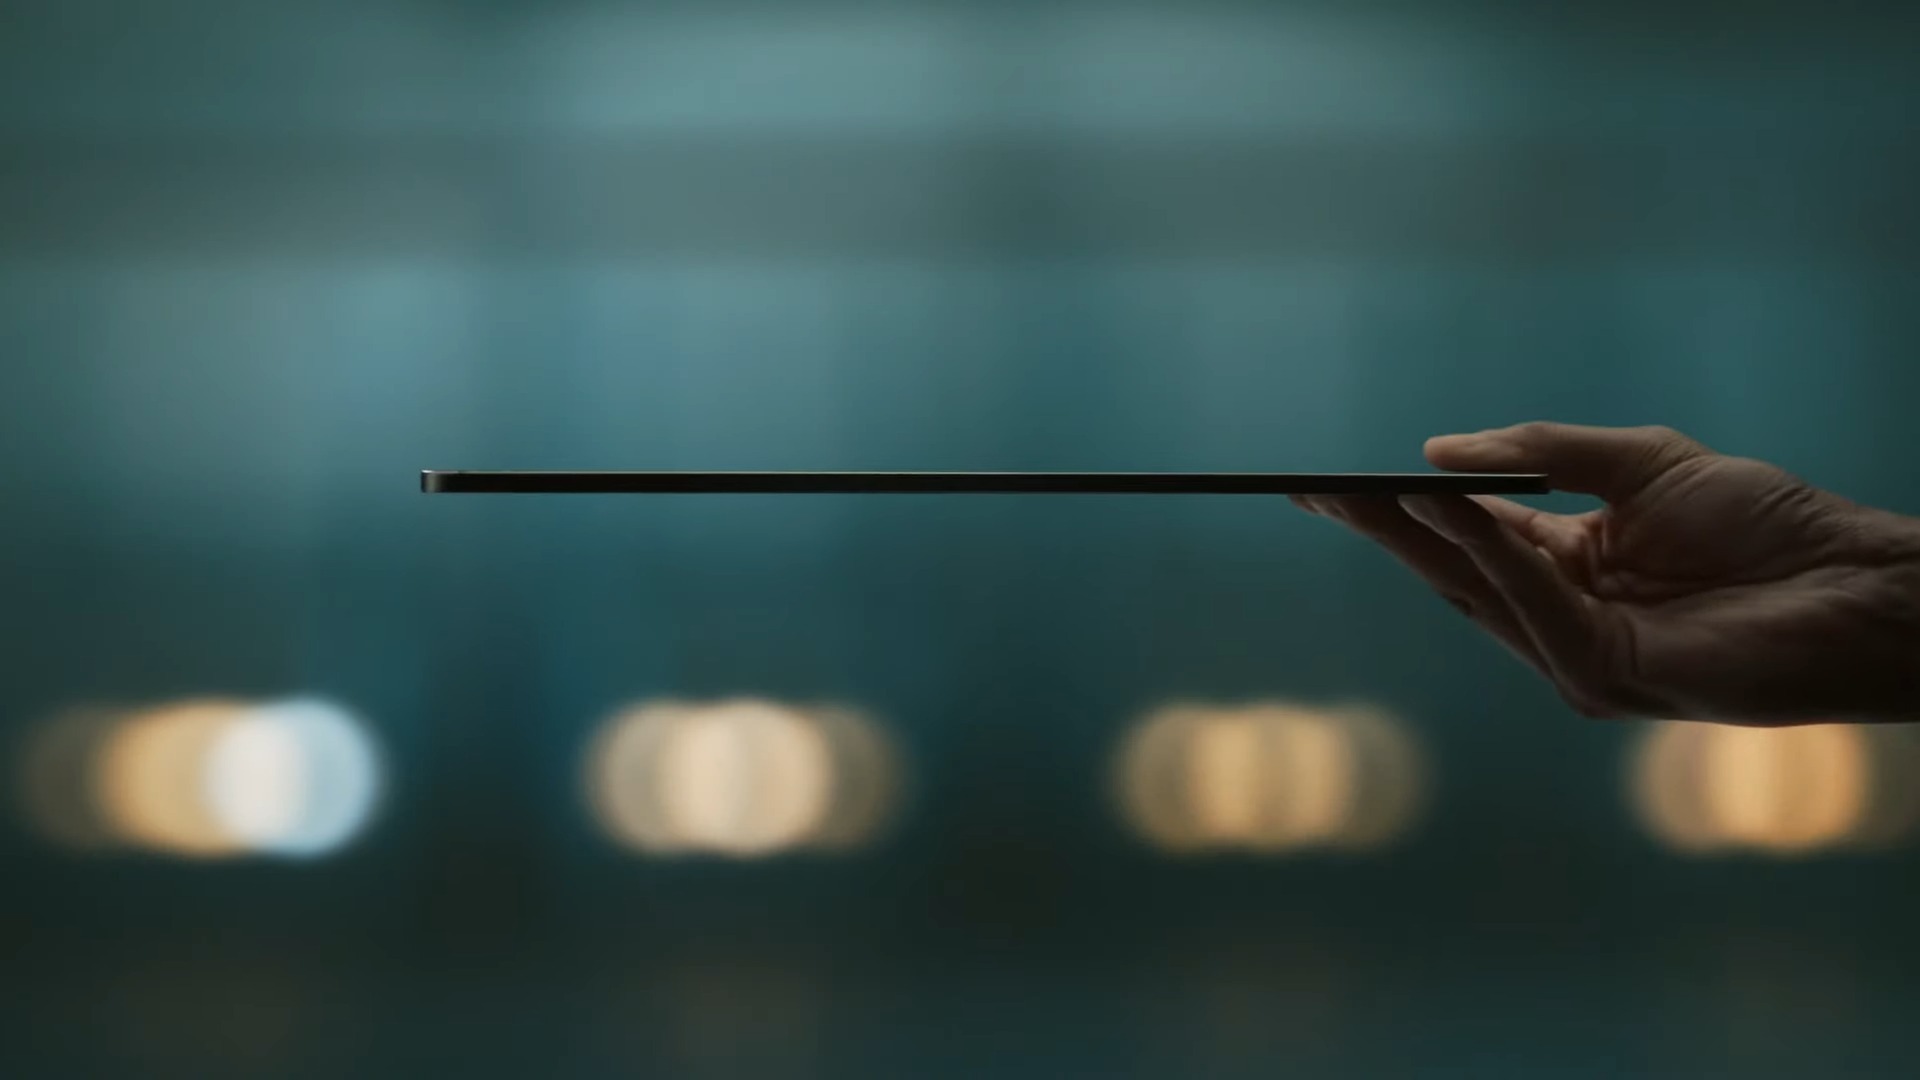 Ultra-thin design at 5.1mm for the 13-inch model, promoting exceptional portability